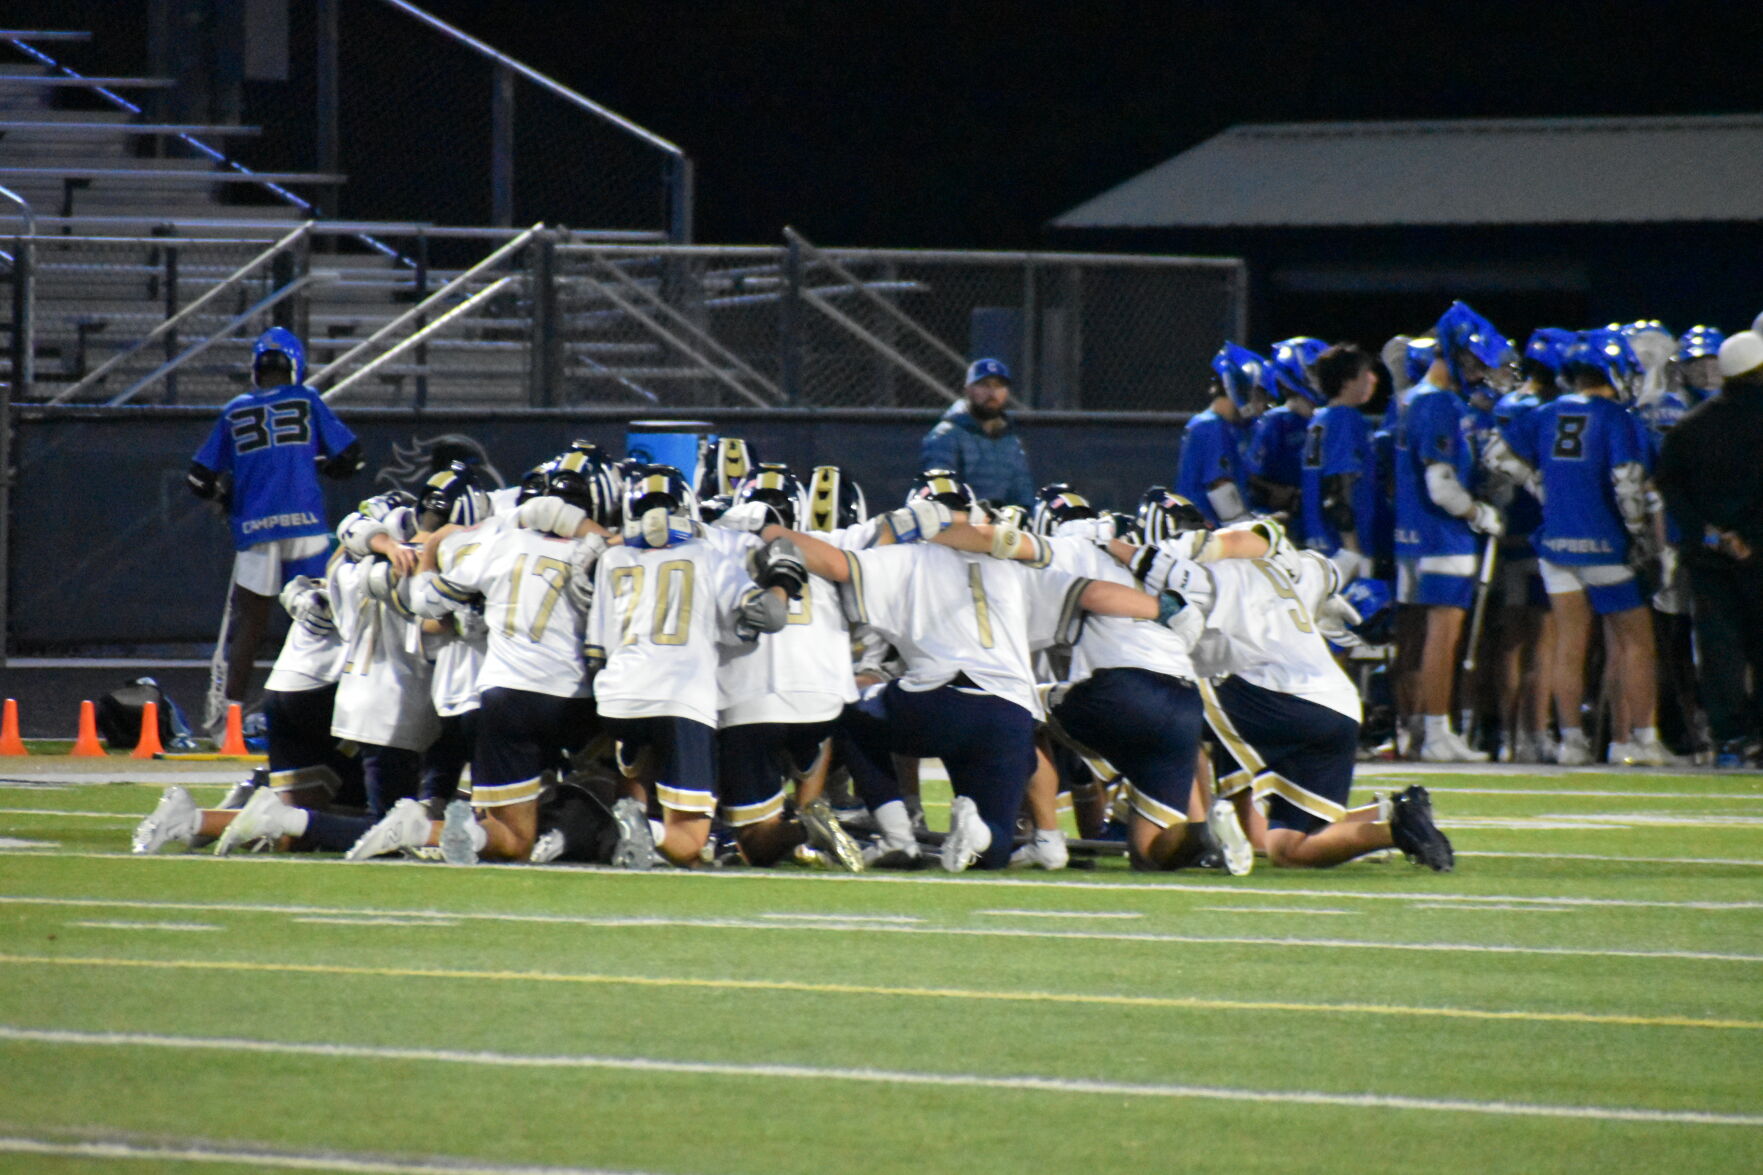 River Ridge Boys Lacrosse Pays Tribute to Late Player Zander Hattersley and Secures Victory in Emotional Season Opener